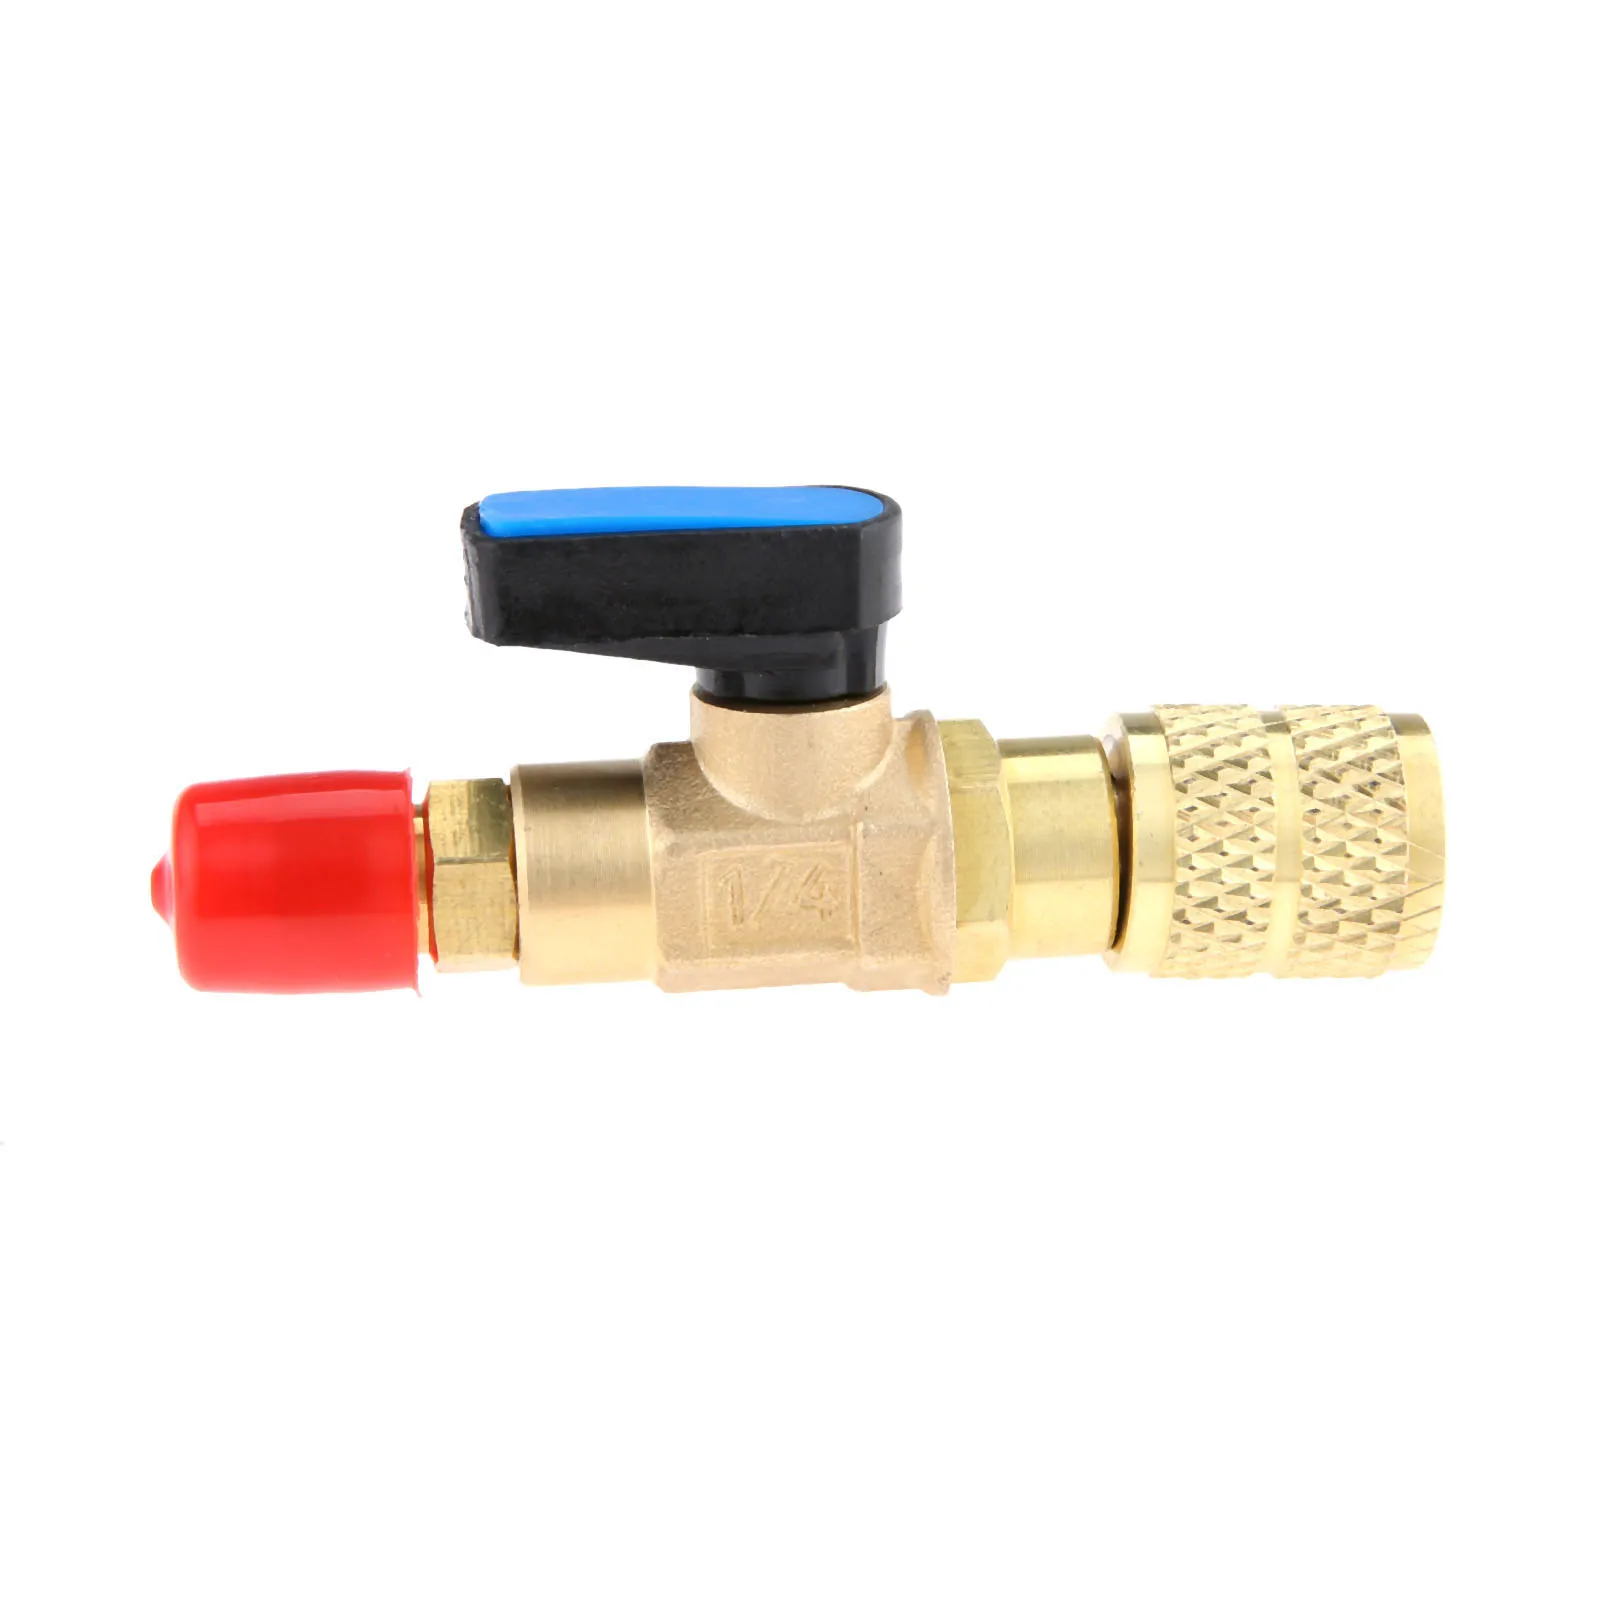 5/16" R410A Refrigeration Charging Adapter Air Conditioning Valve Tool ^VX 1/4" 